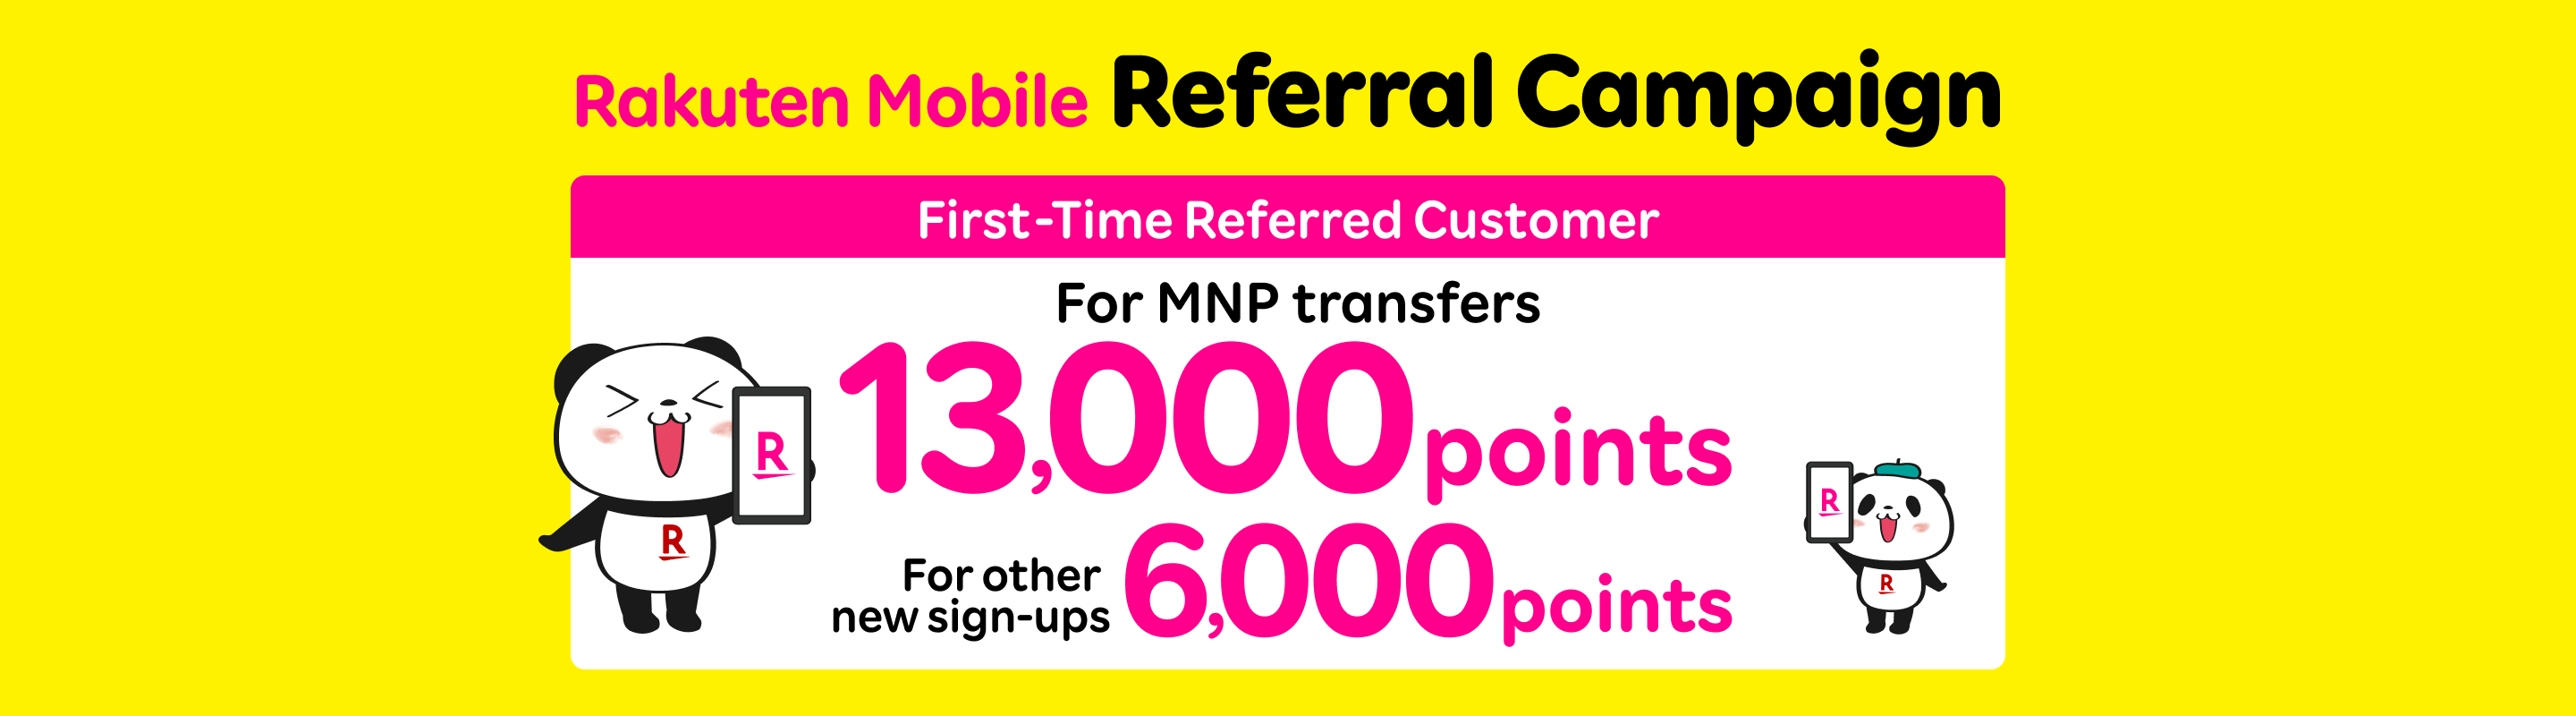 Apply for Rakuten Mobile via an existing subscriber's referral and receive 13,000 points for MNP transfers, or 6,000 points for other new sign-ups.